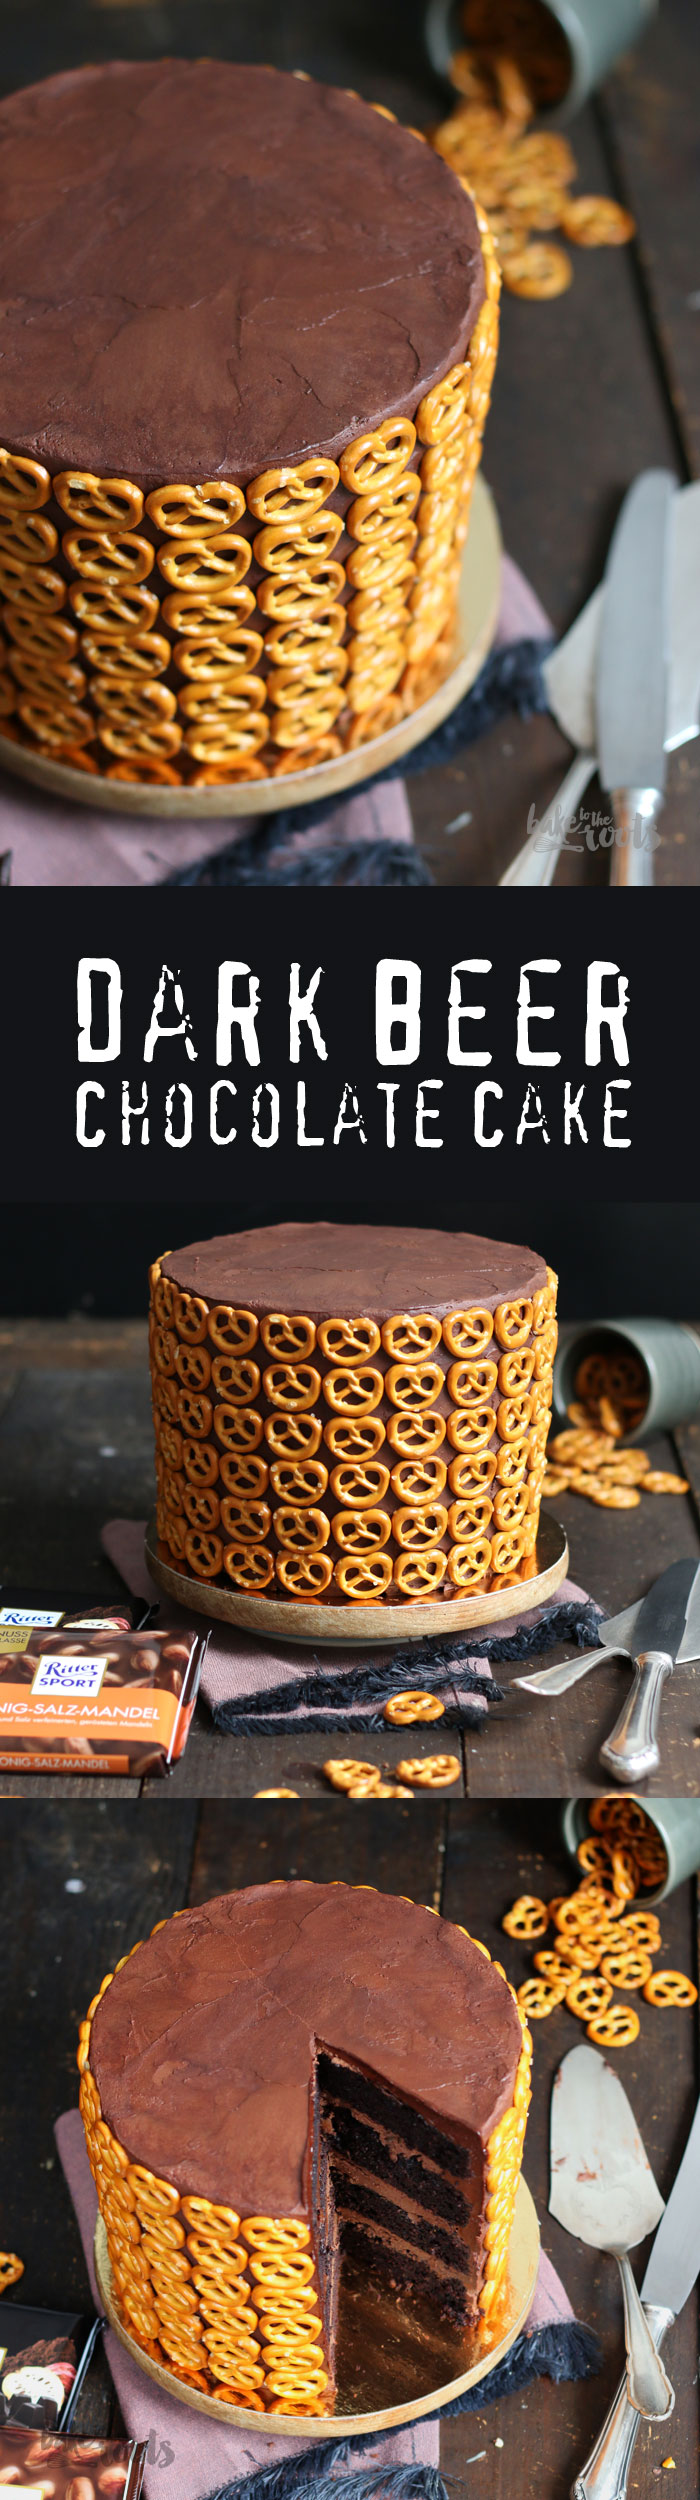 Delicious Dark Beer Chocolate Cake with a Honey-Salted-Almond Ganache Filling and Salted Pretzels | Bake to the roots